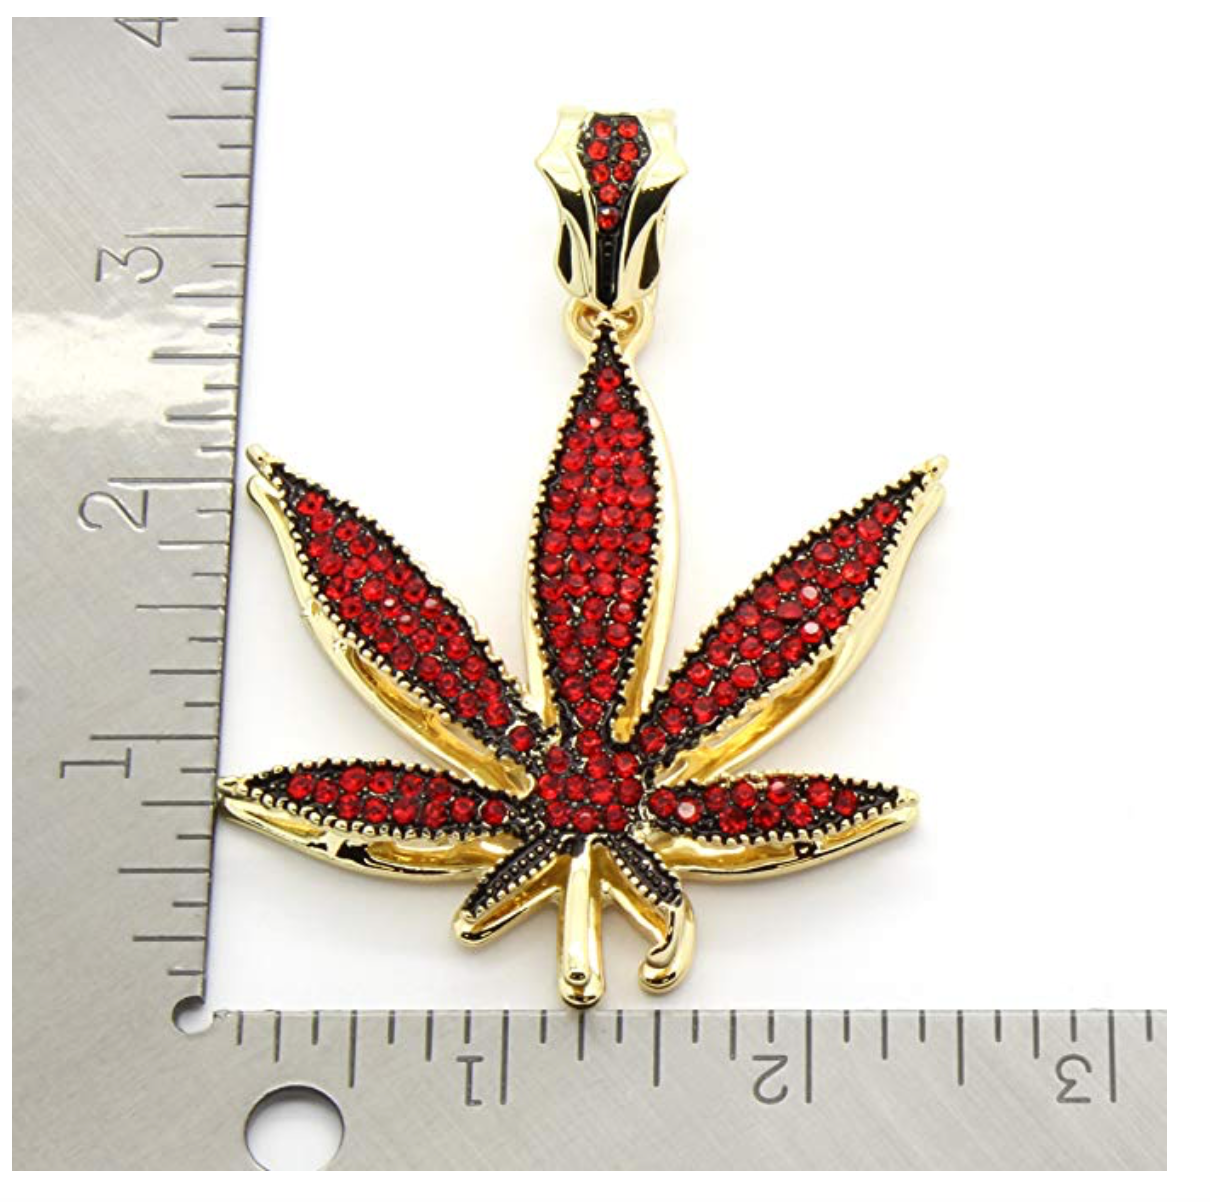 Red Leaf 420 Chain Weed Necklace Diamond Pendant Hip Hop Rapper Green Marihuana Chain Gold Silver Color Metal Alloy 24in